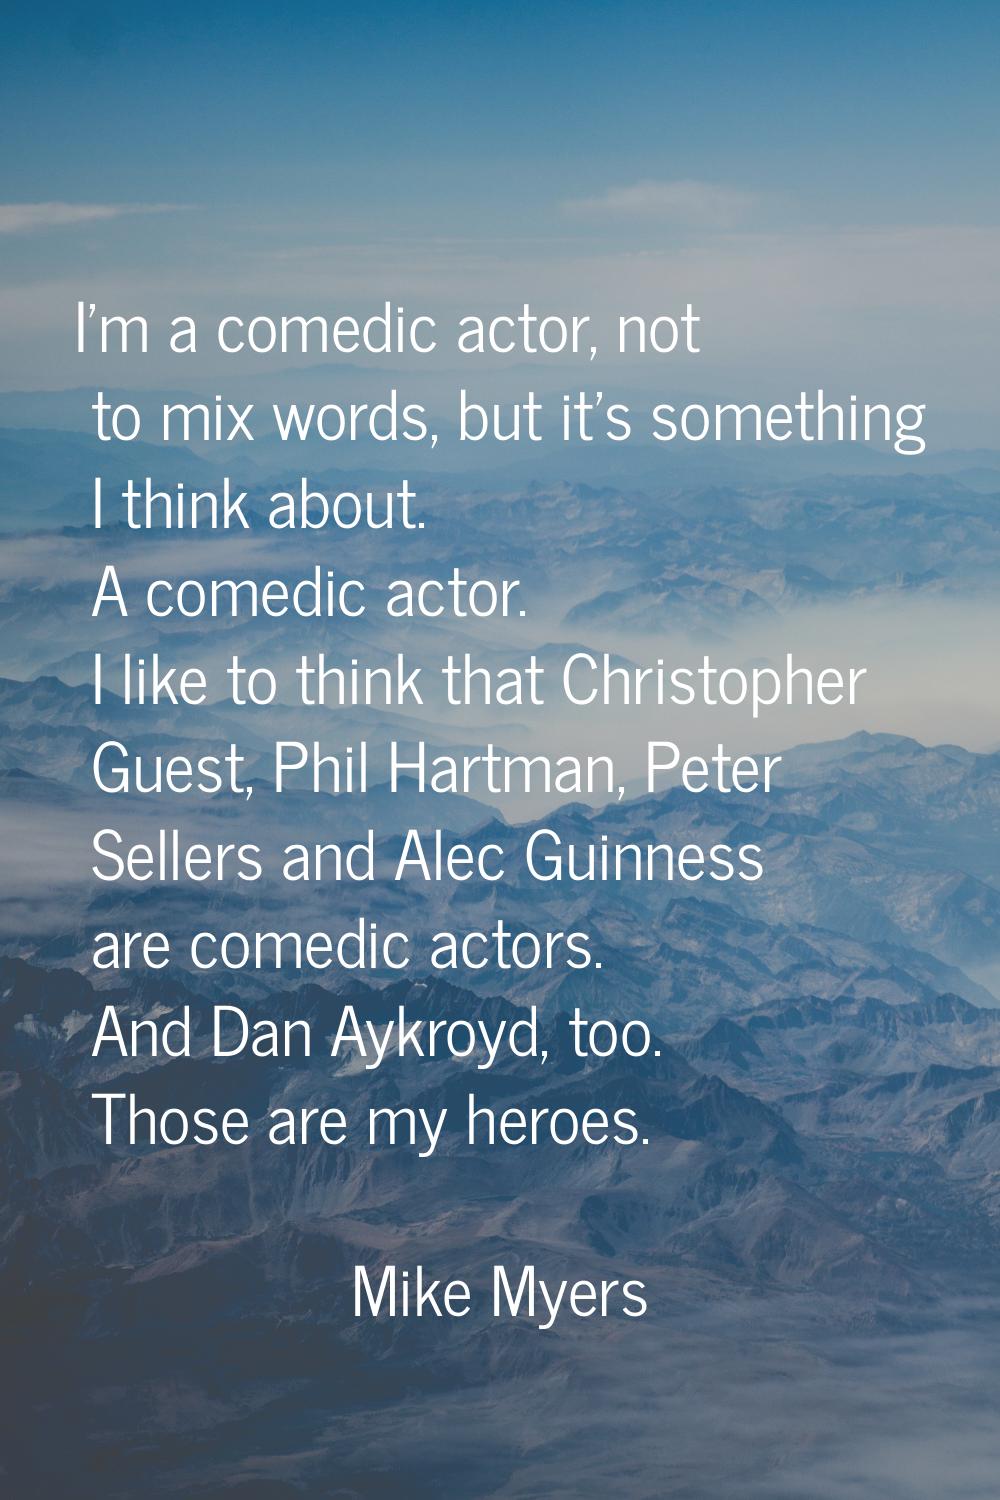 I'm a comedic actor, not to mix words, but it's something I think about. A comedic actor. I like to